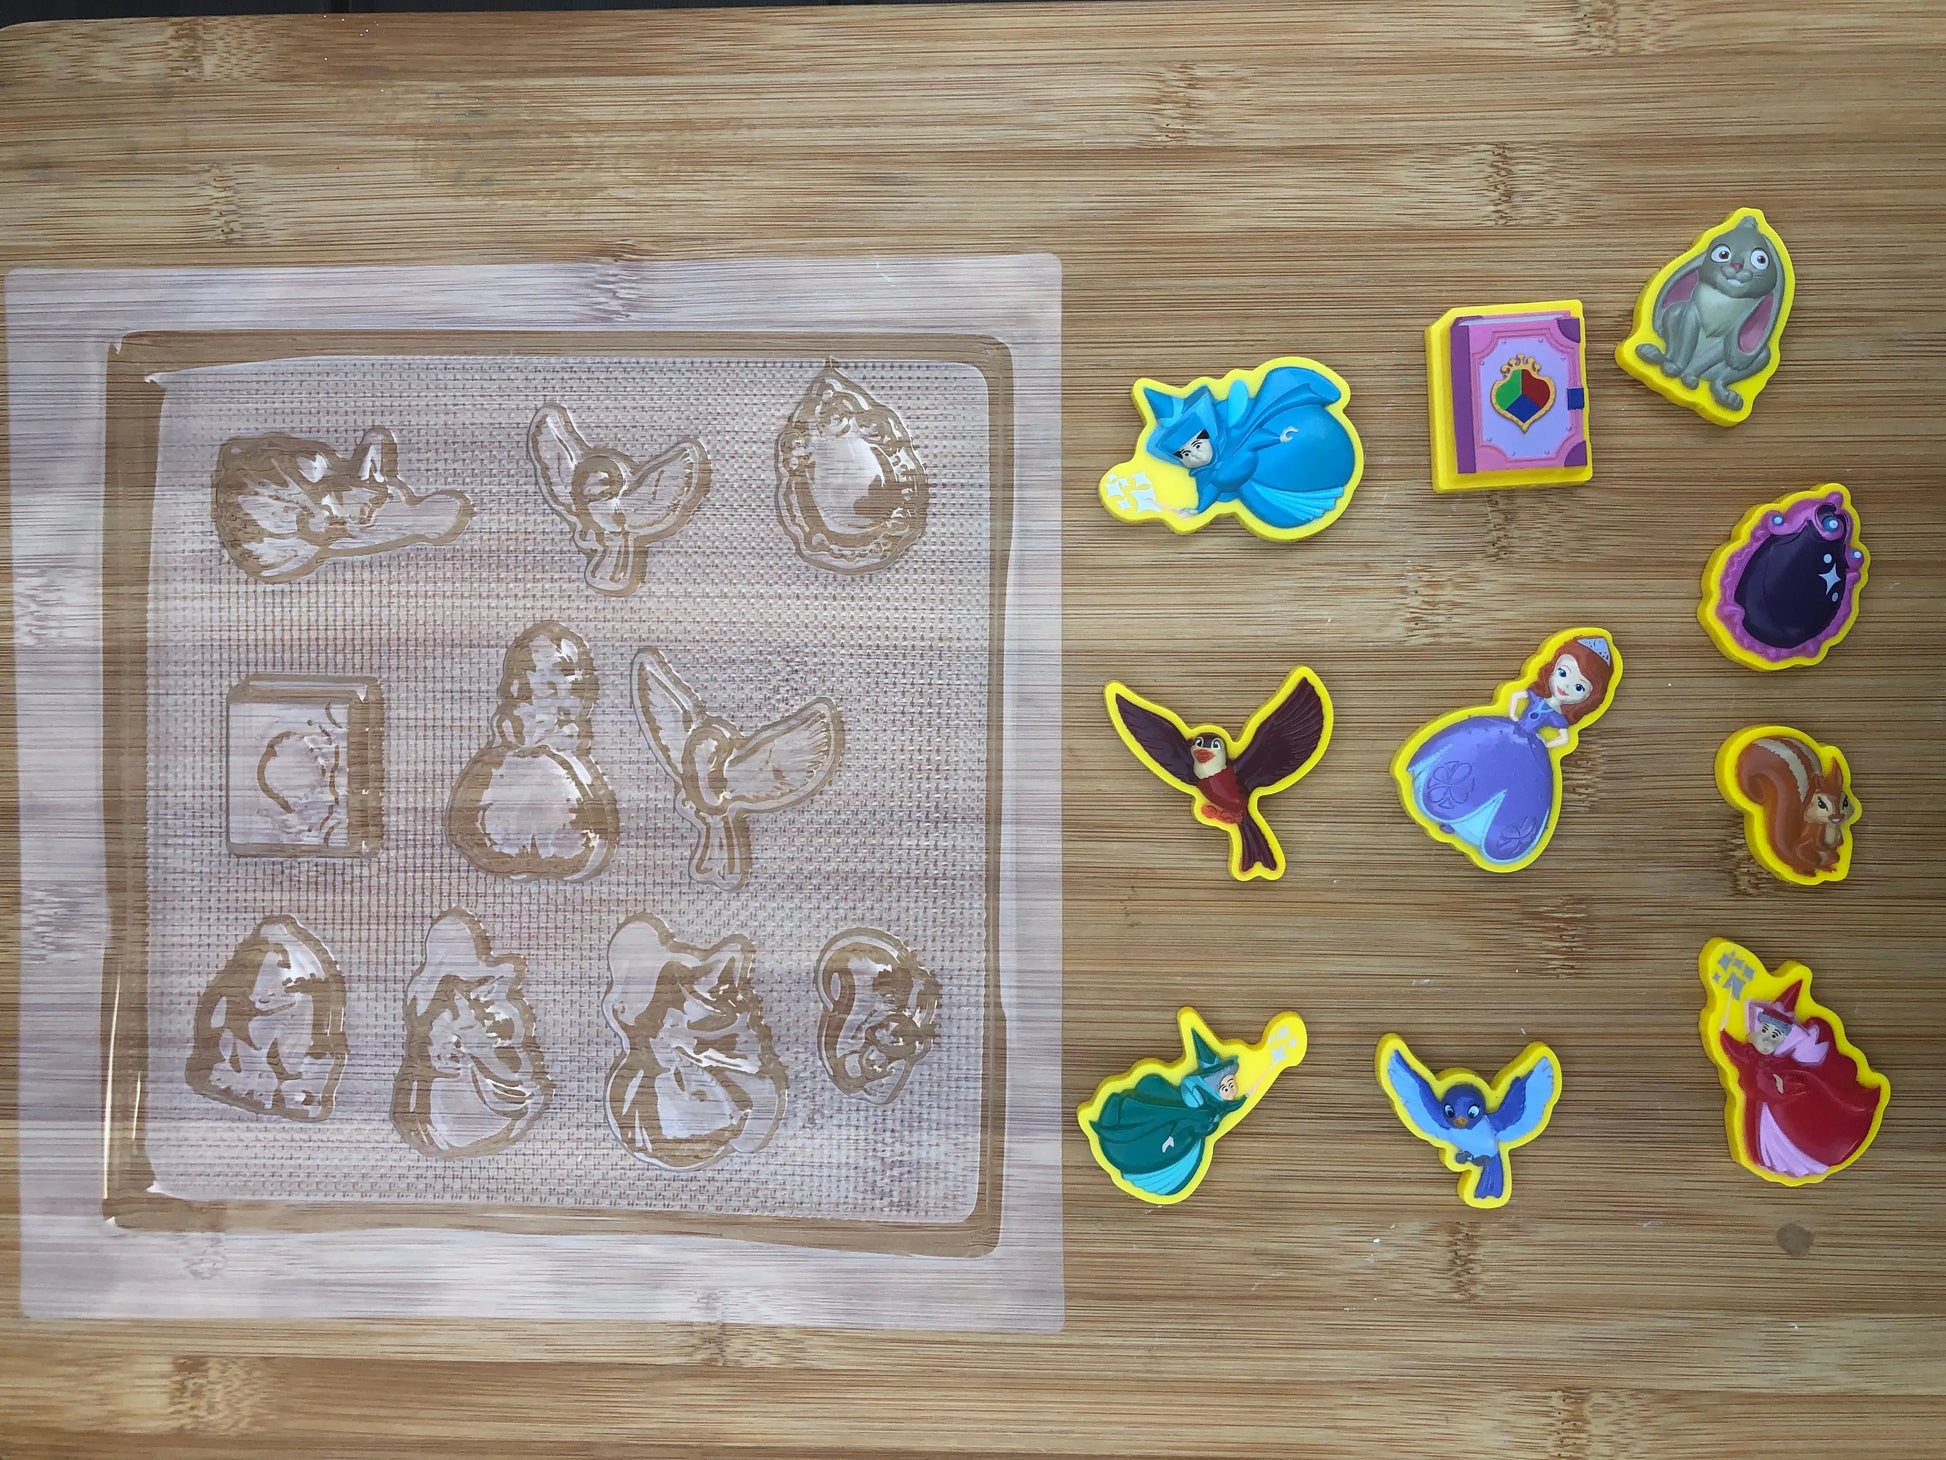 Sofia the first-INSPIRED chocolate mould MEG cookie cutters